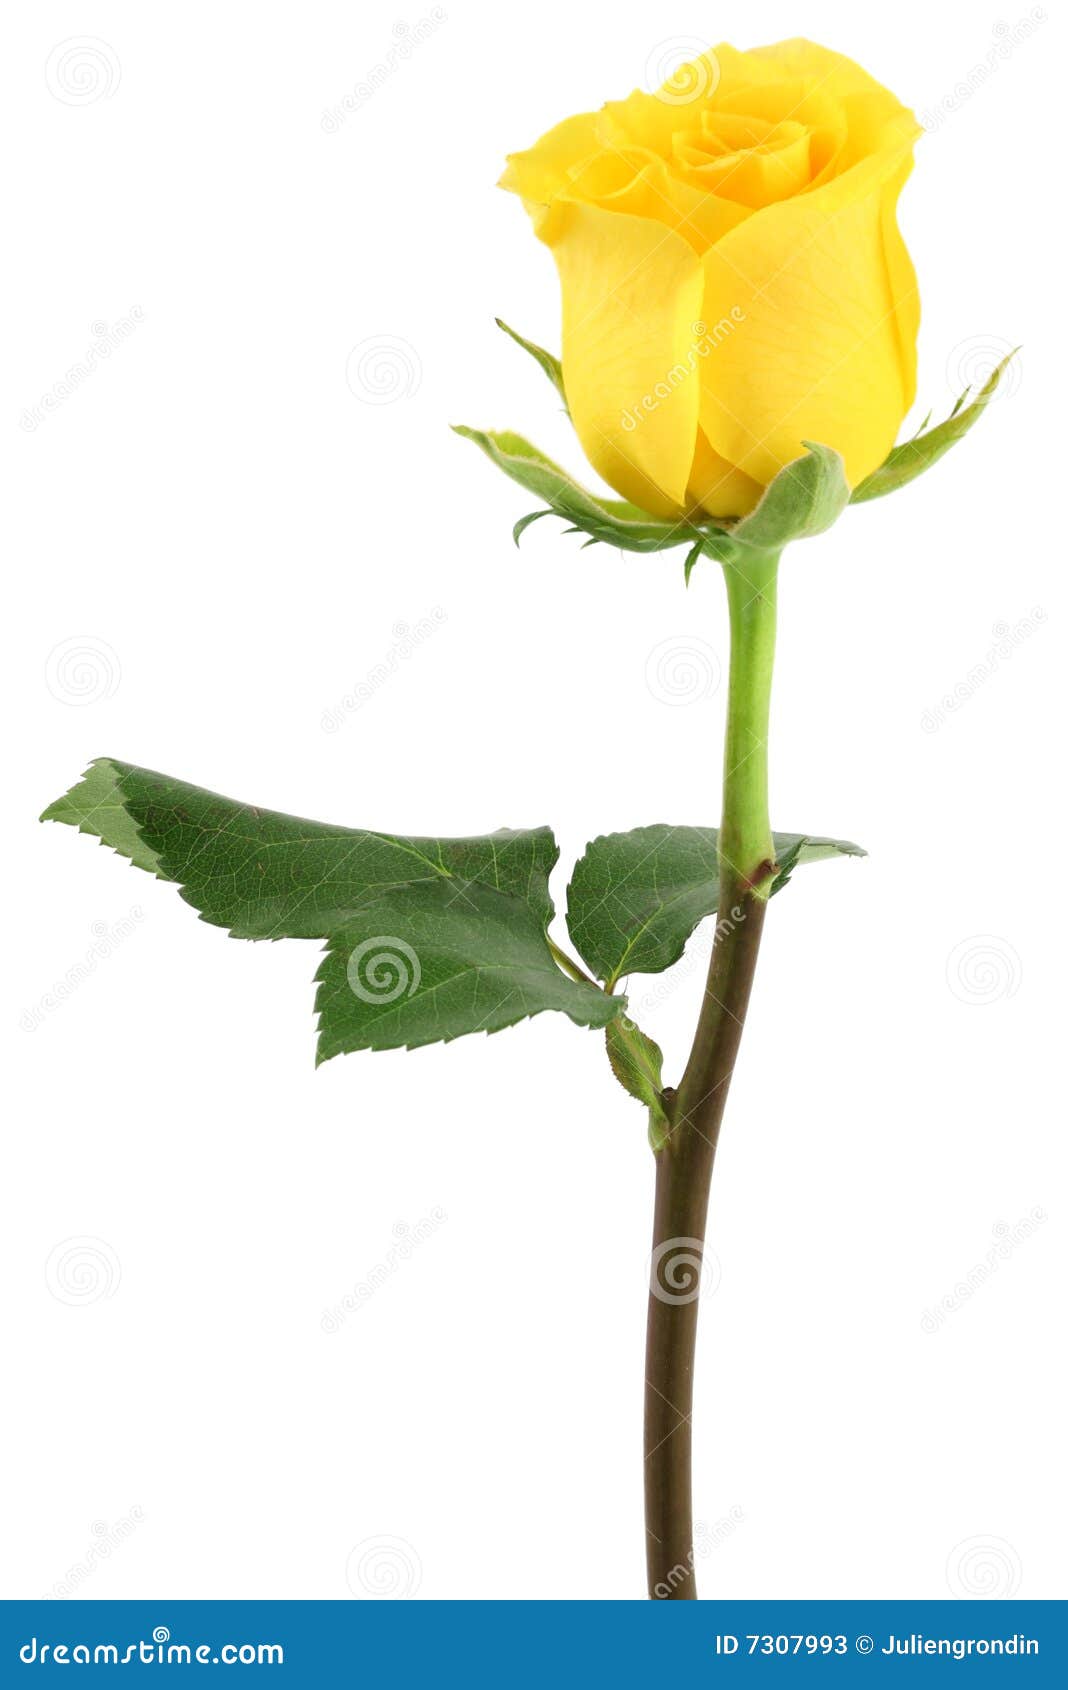 yellow roses pictures clip art - photo #43